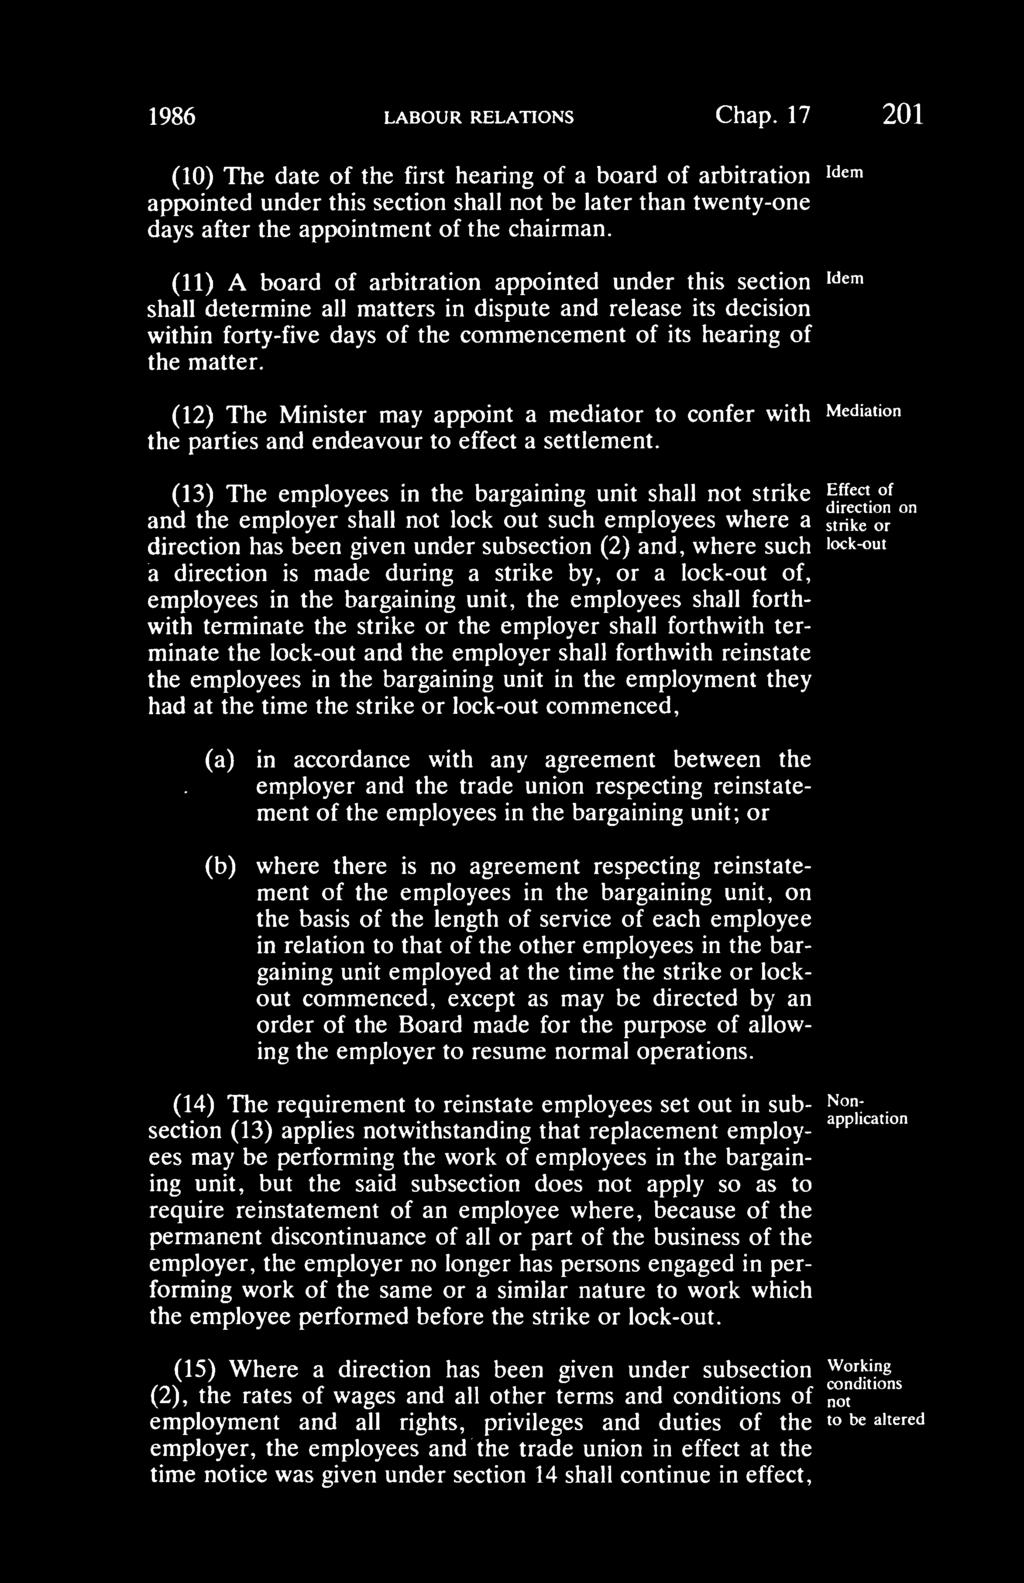 (11) A board of arbitration appointed under this section i<i«shall determine all matters in dispute and release its decision hearing of within forty-five days of the commencement of its the matter.